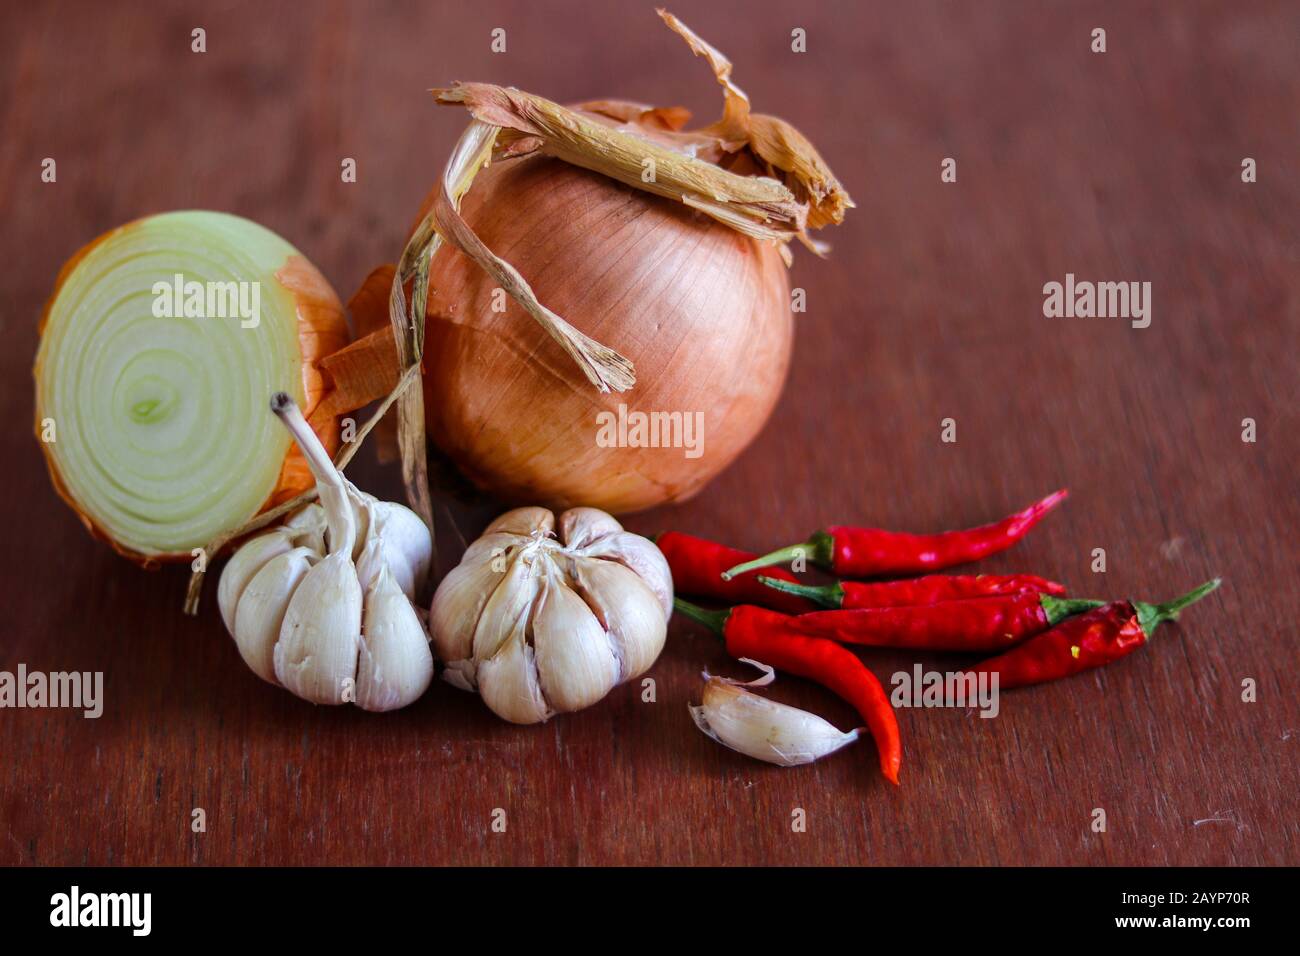 Still life showing concept of gastronomy, cooking, cuisine,clean organic diet and vegan lifestyle Stock Photo